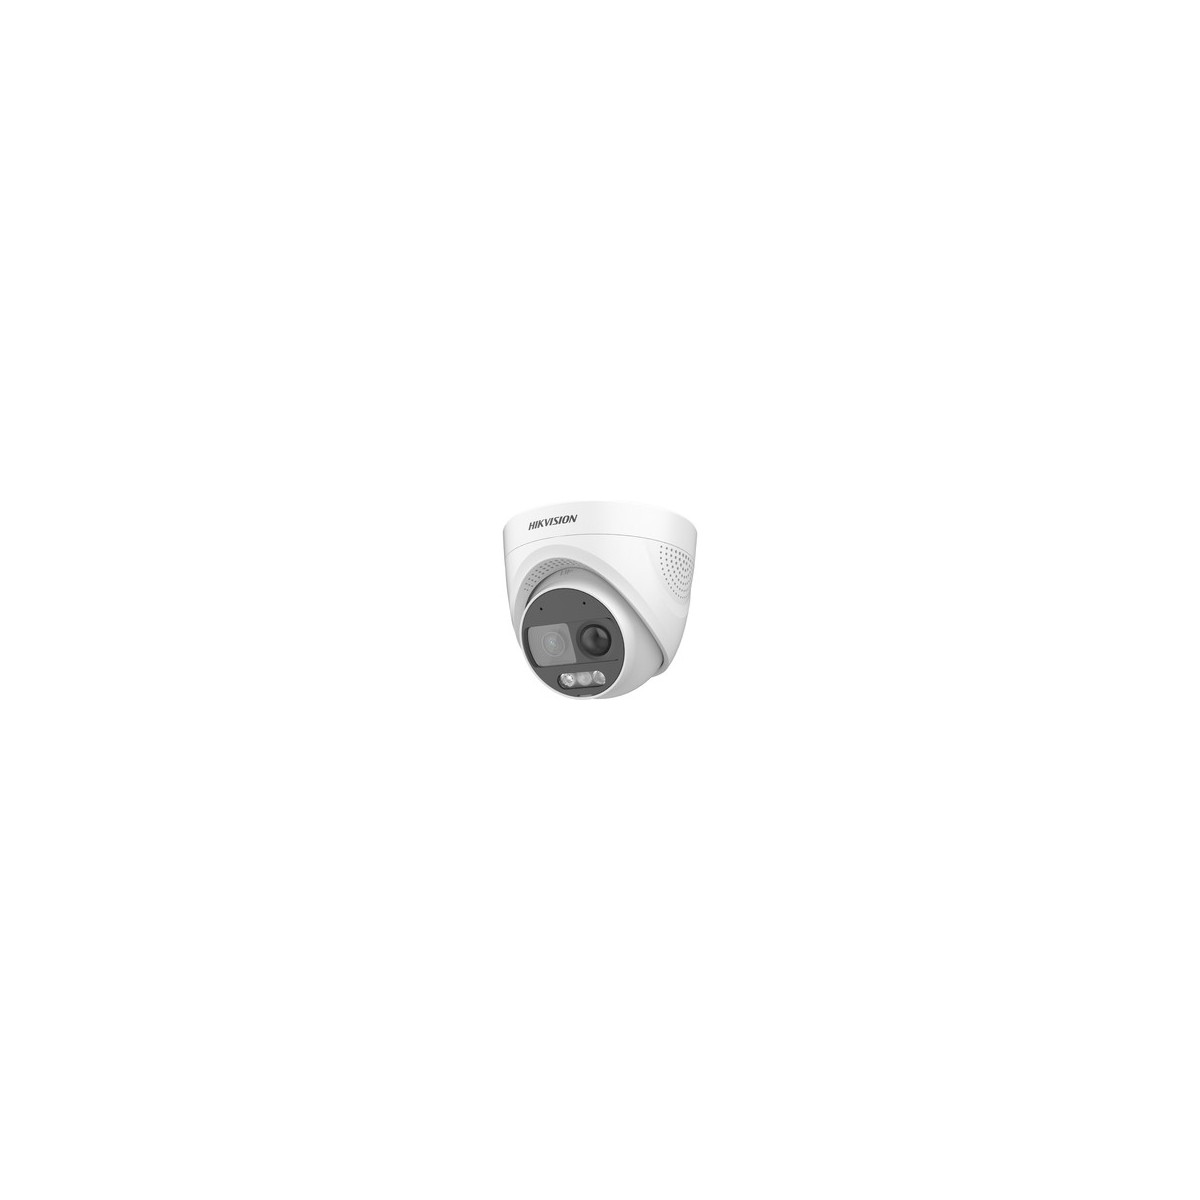 Hikvision Digital Technology DS-2CE72DF3T-PIRXOS - CCTV security camera - Outdoor - Wired - English - Ceiling-wall - White